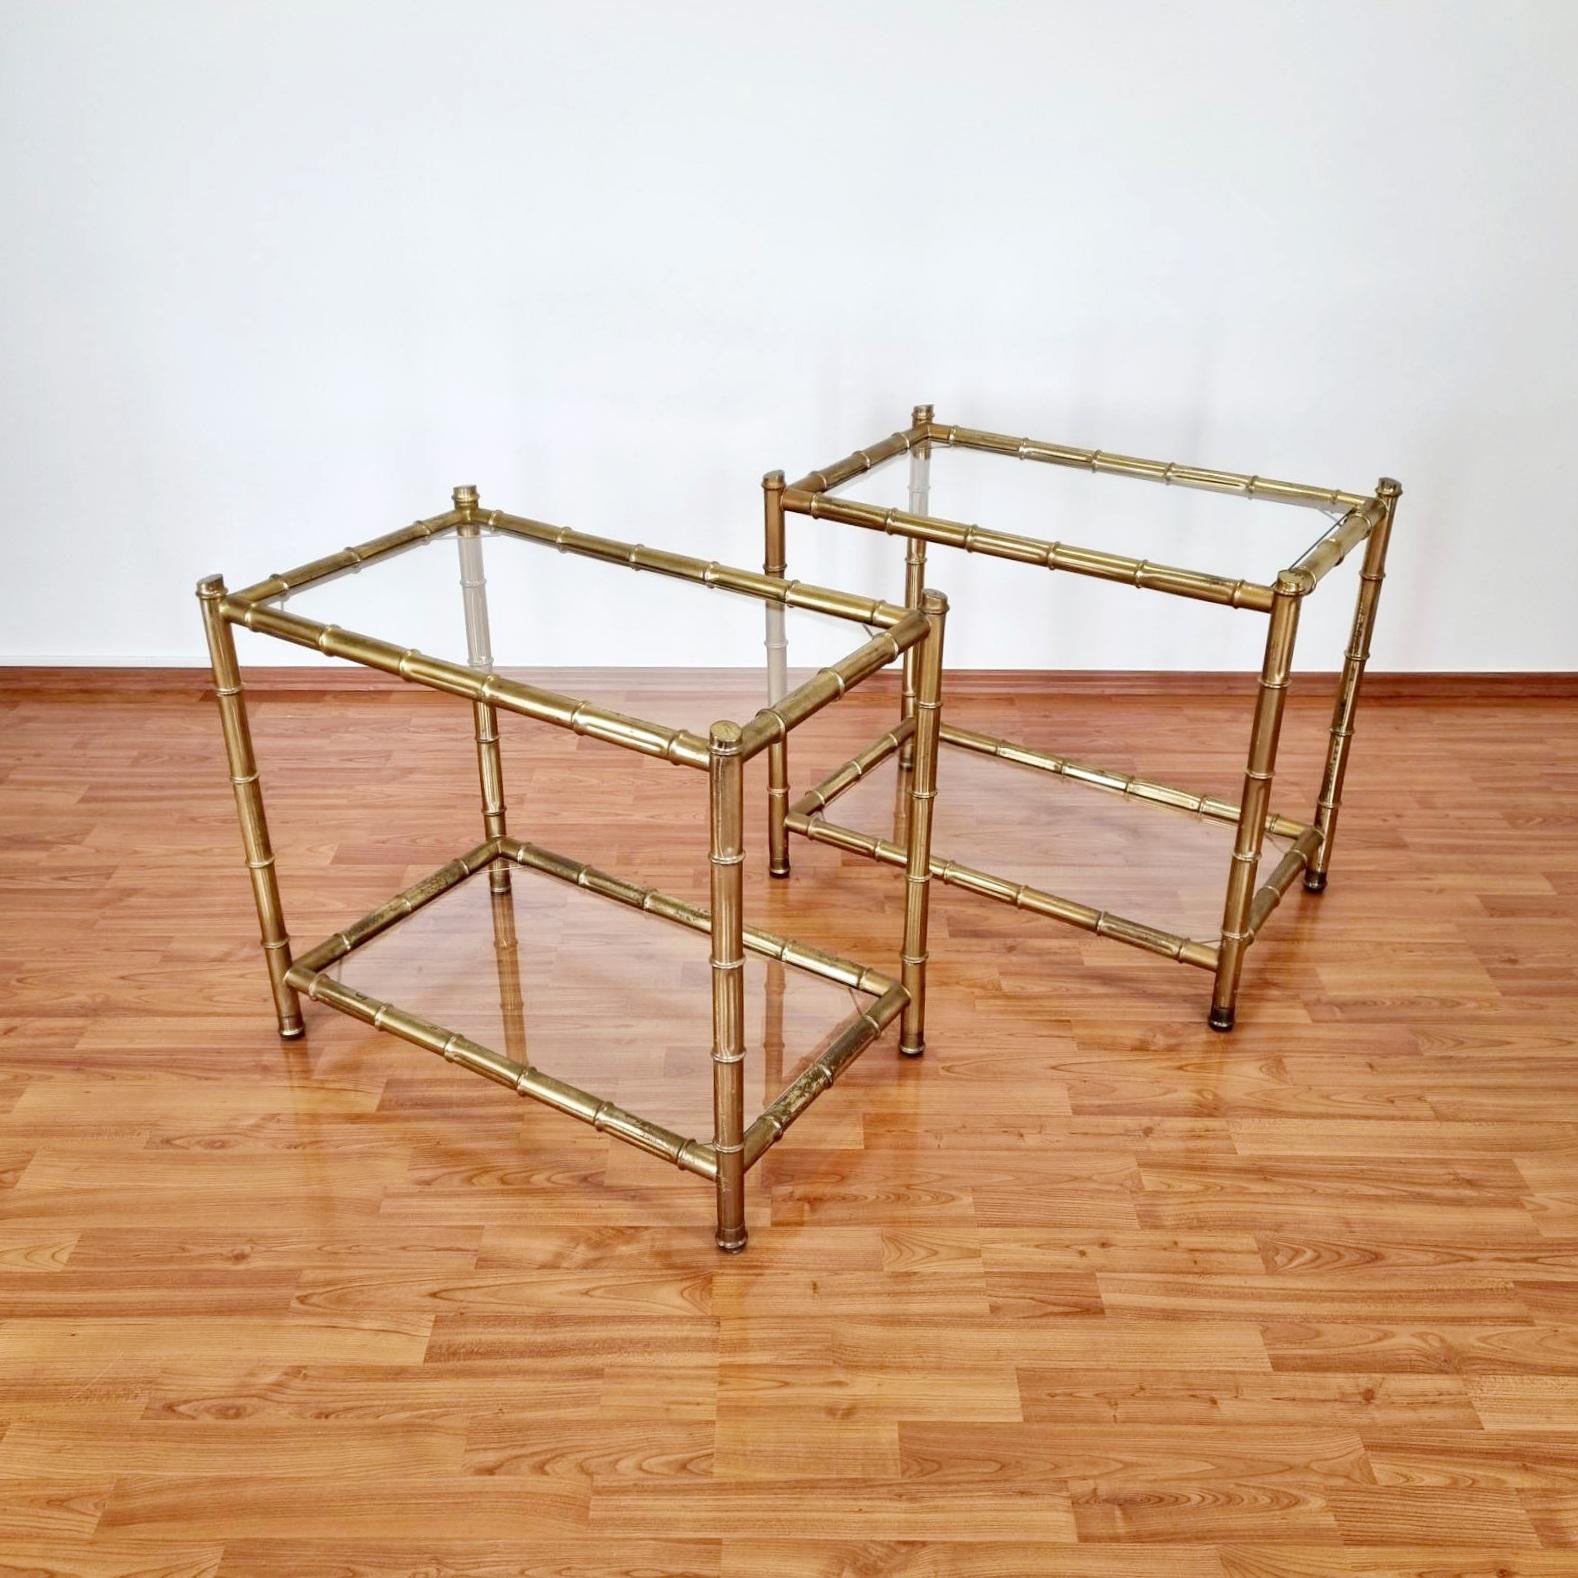 Pair of brass side or coffee tables from the 60s era. Nice bamboo imitation.
In style of Maison Jansen
In very good condition with minor signs of use and age (all visible on photos).